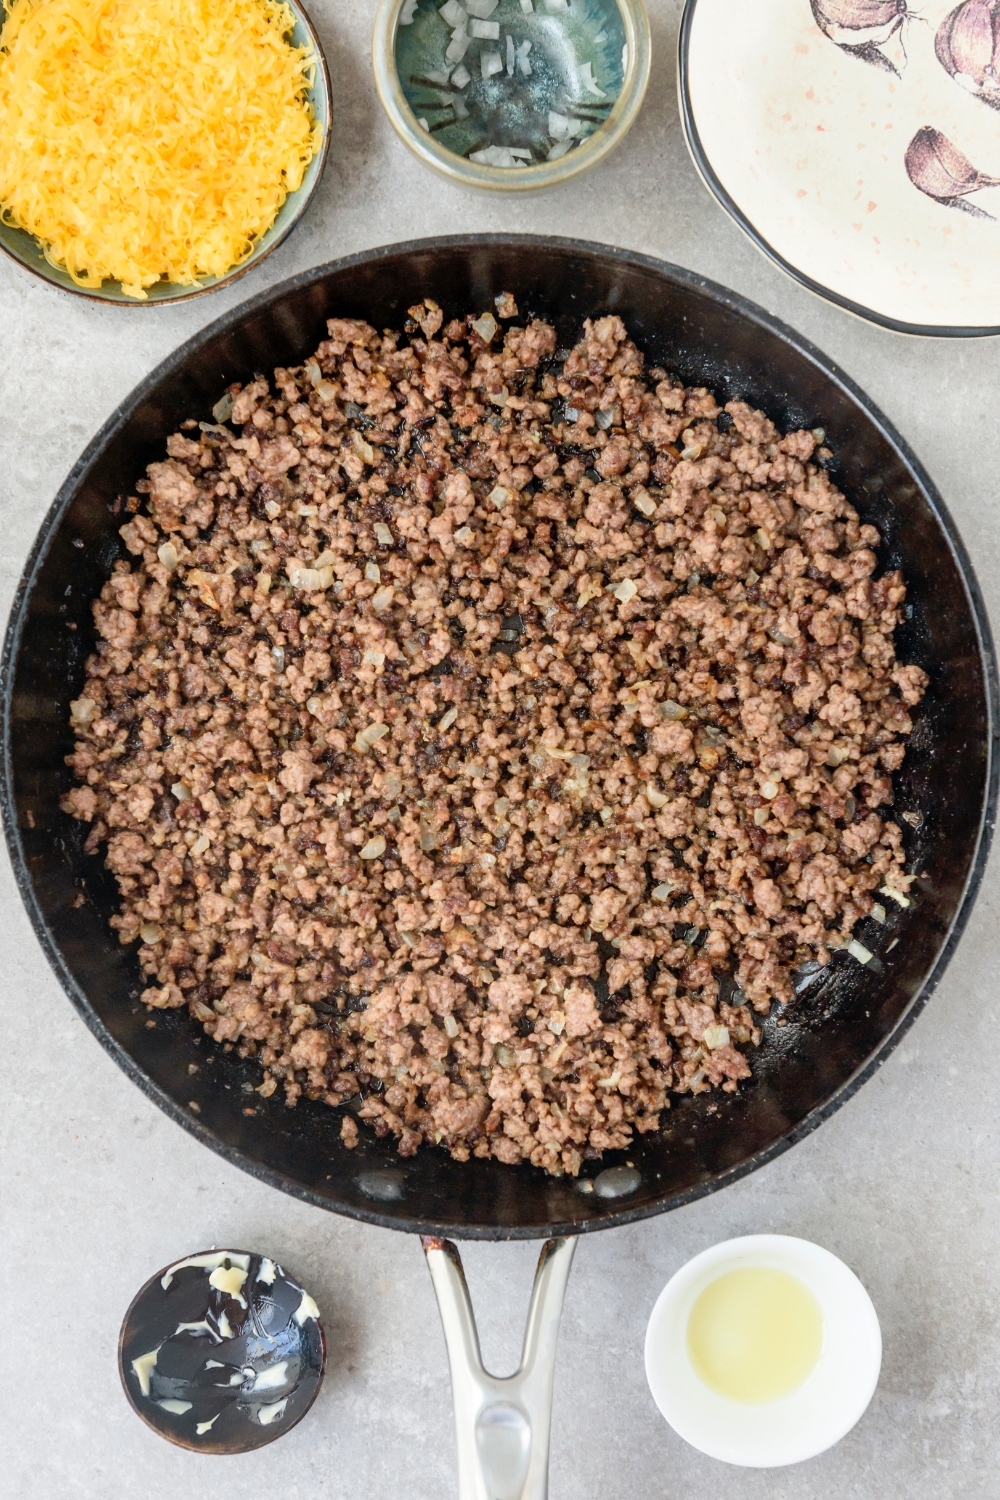 A skillet with cooked ground beef in it.